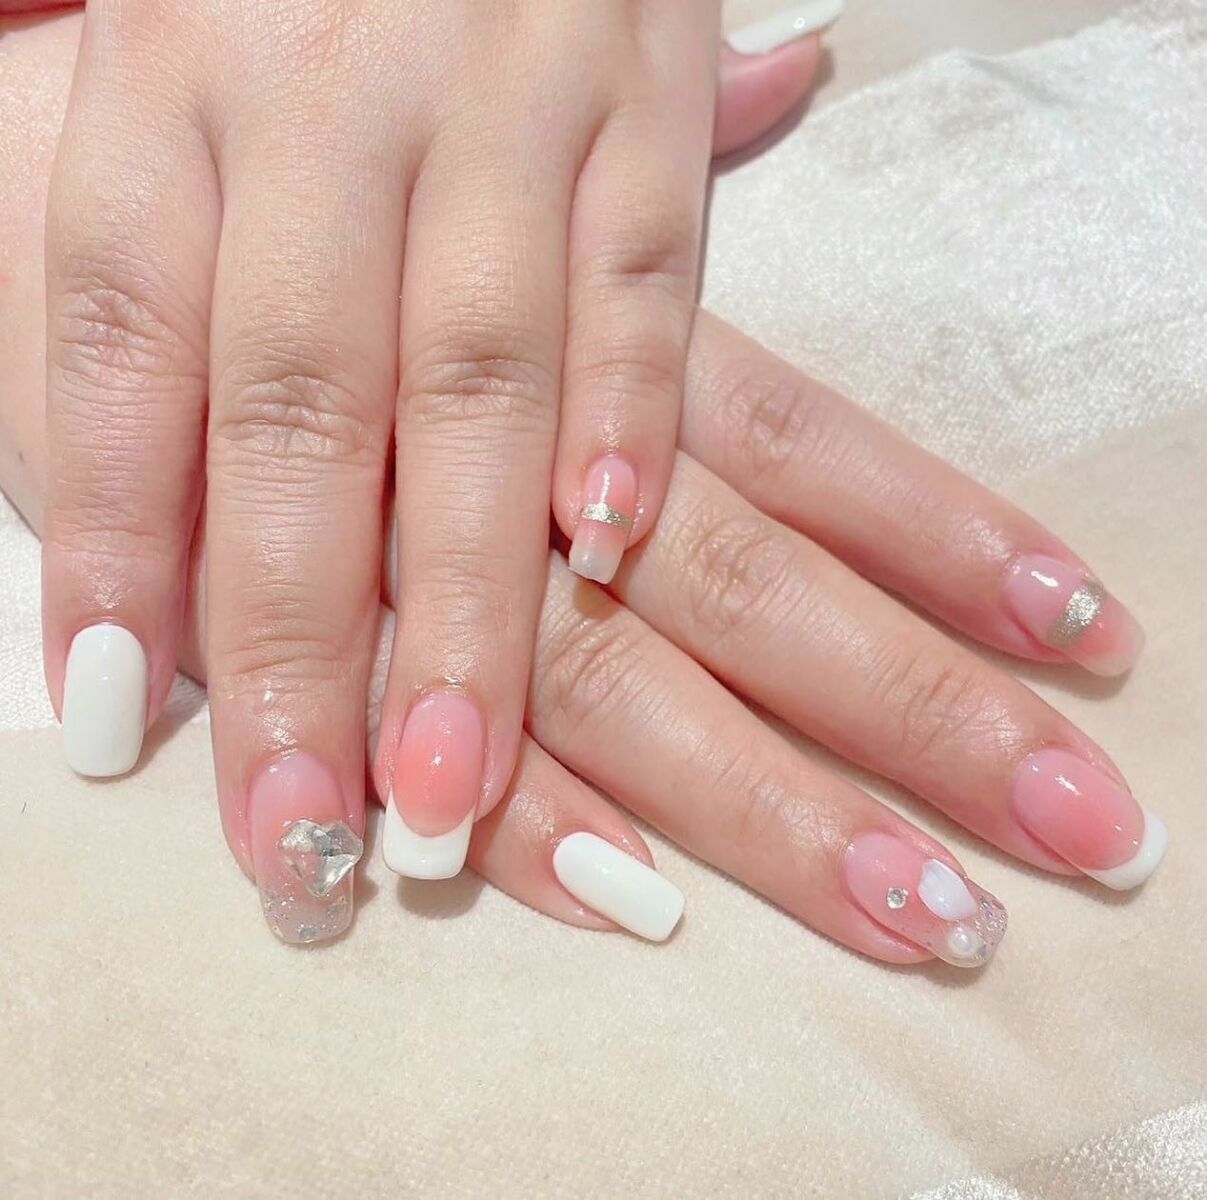 8 English-Friendly Nail Artists and Nail Salons in Seoul | 10 Magazine